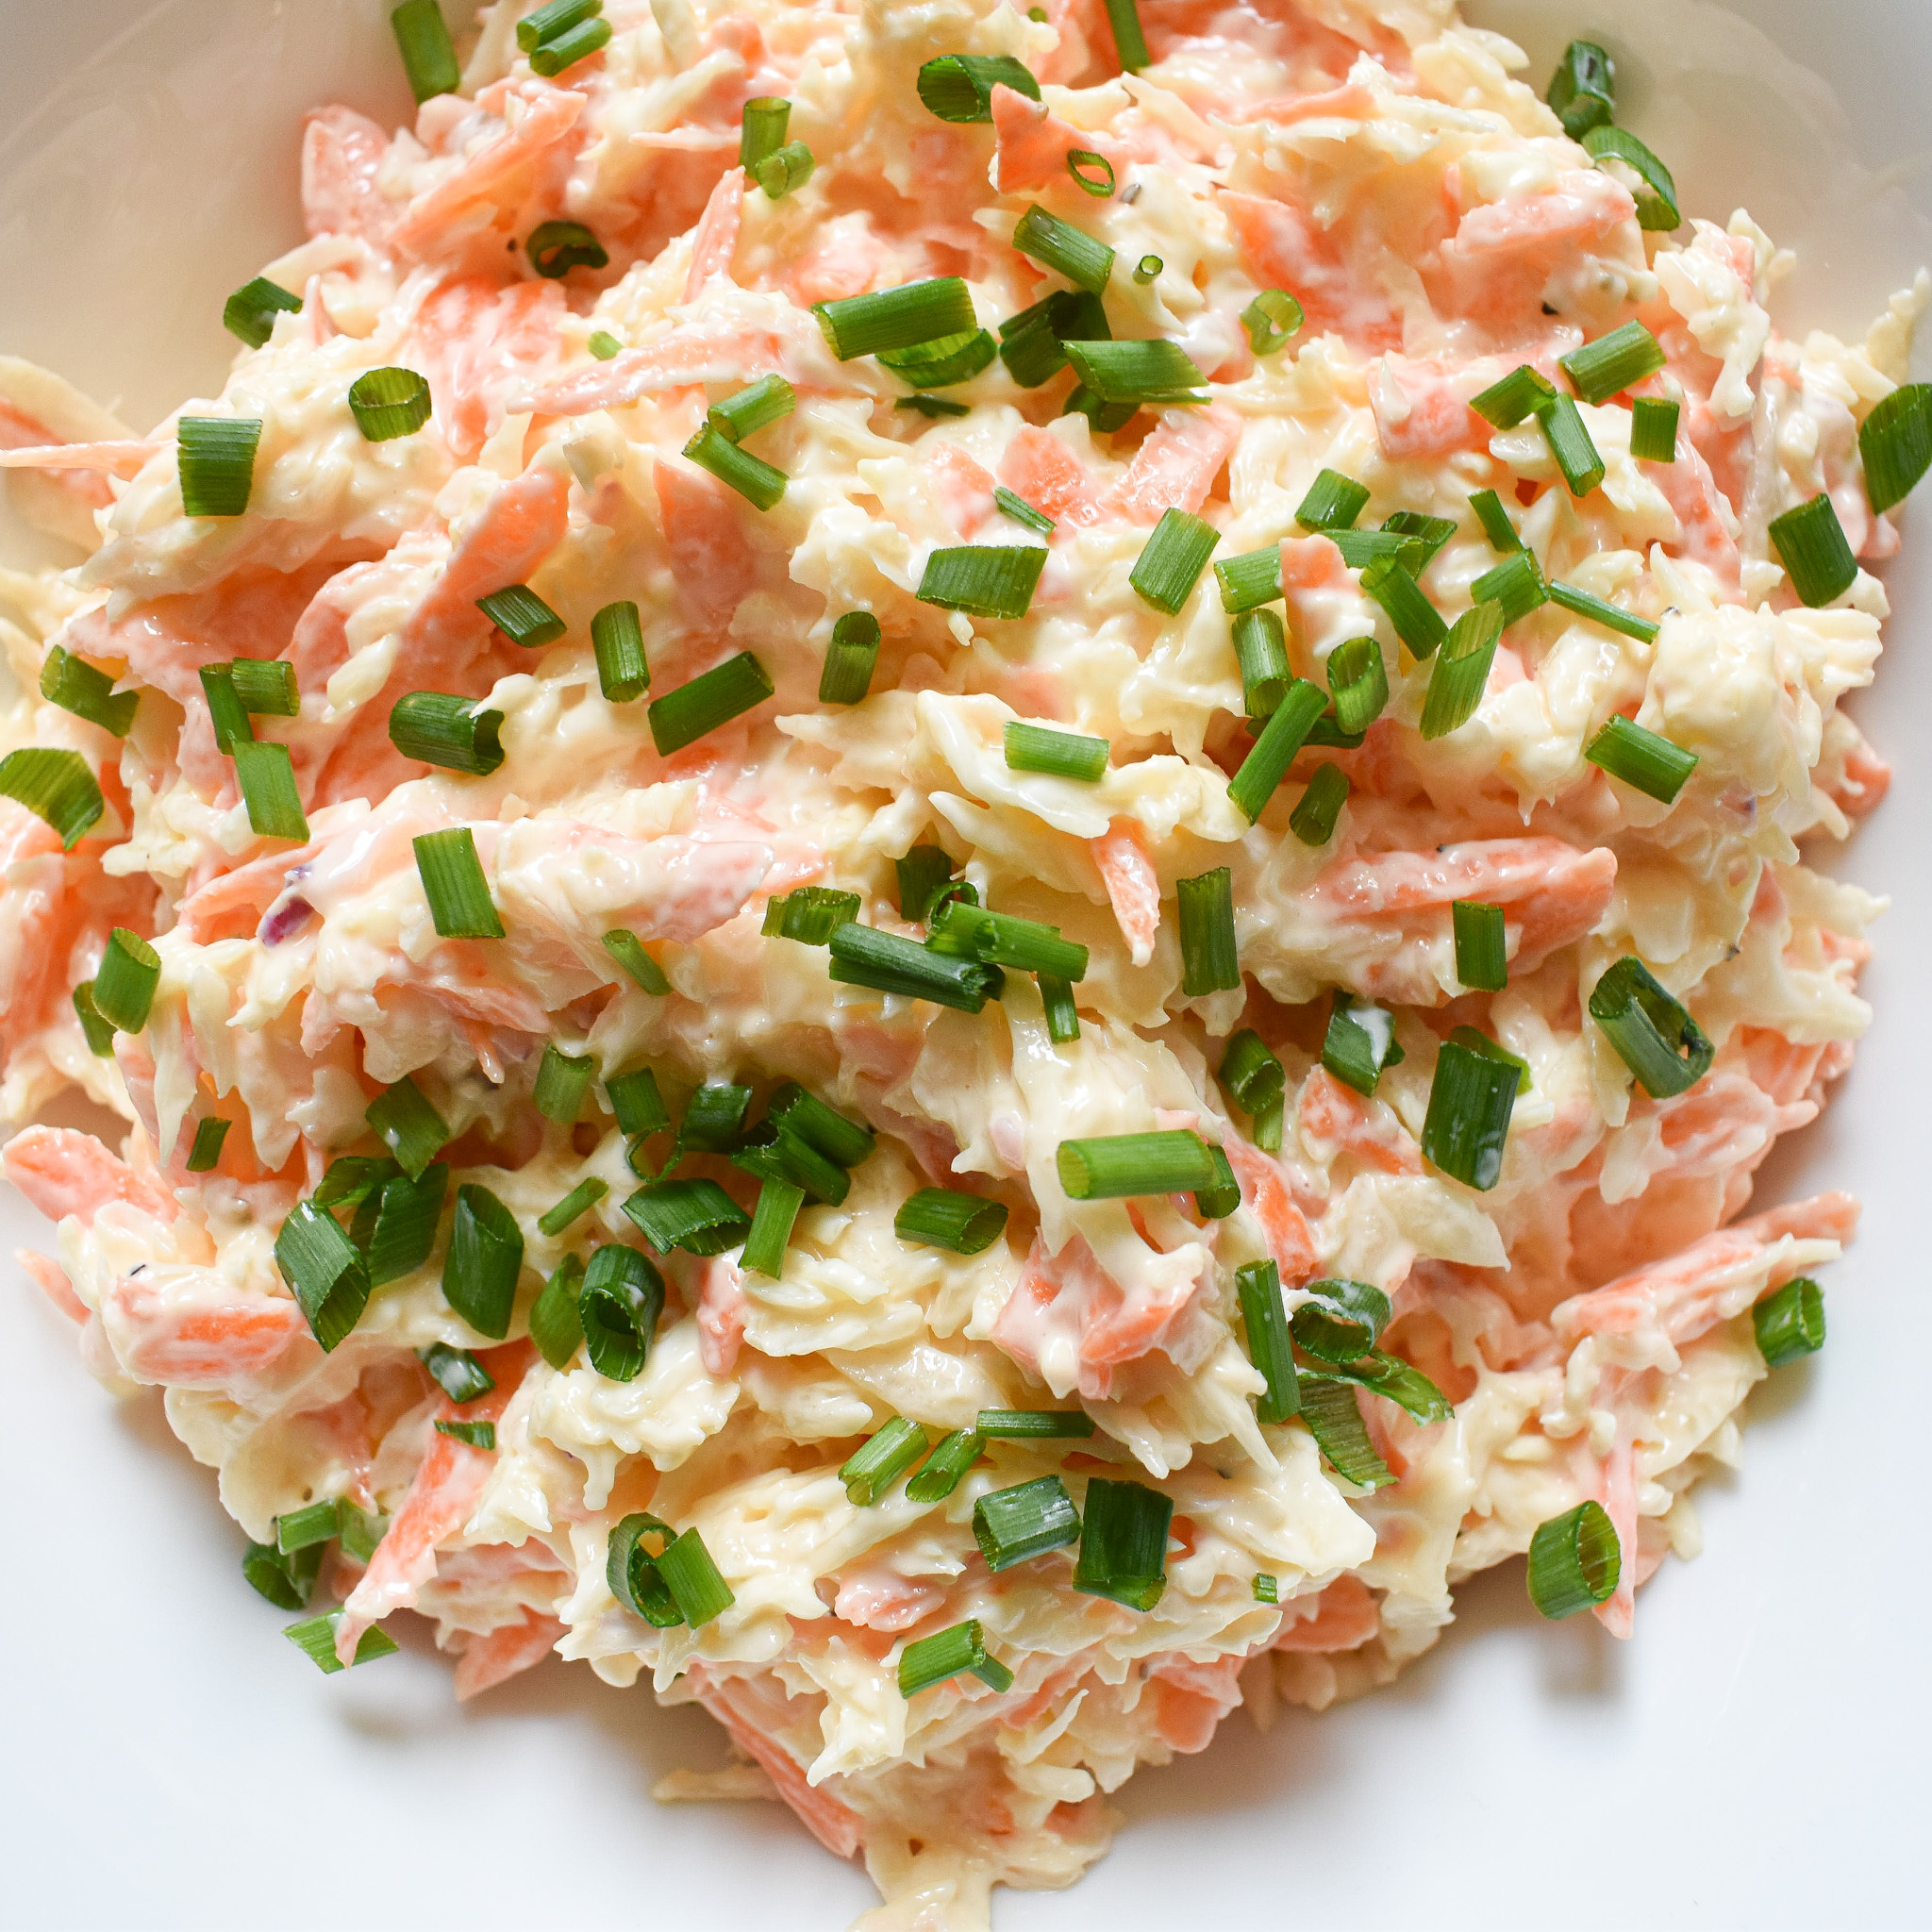 Reduced calorie coleslaw